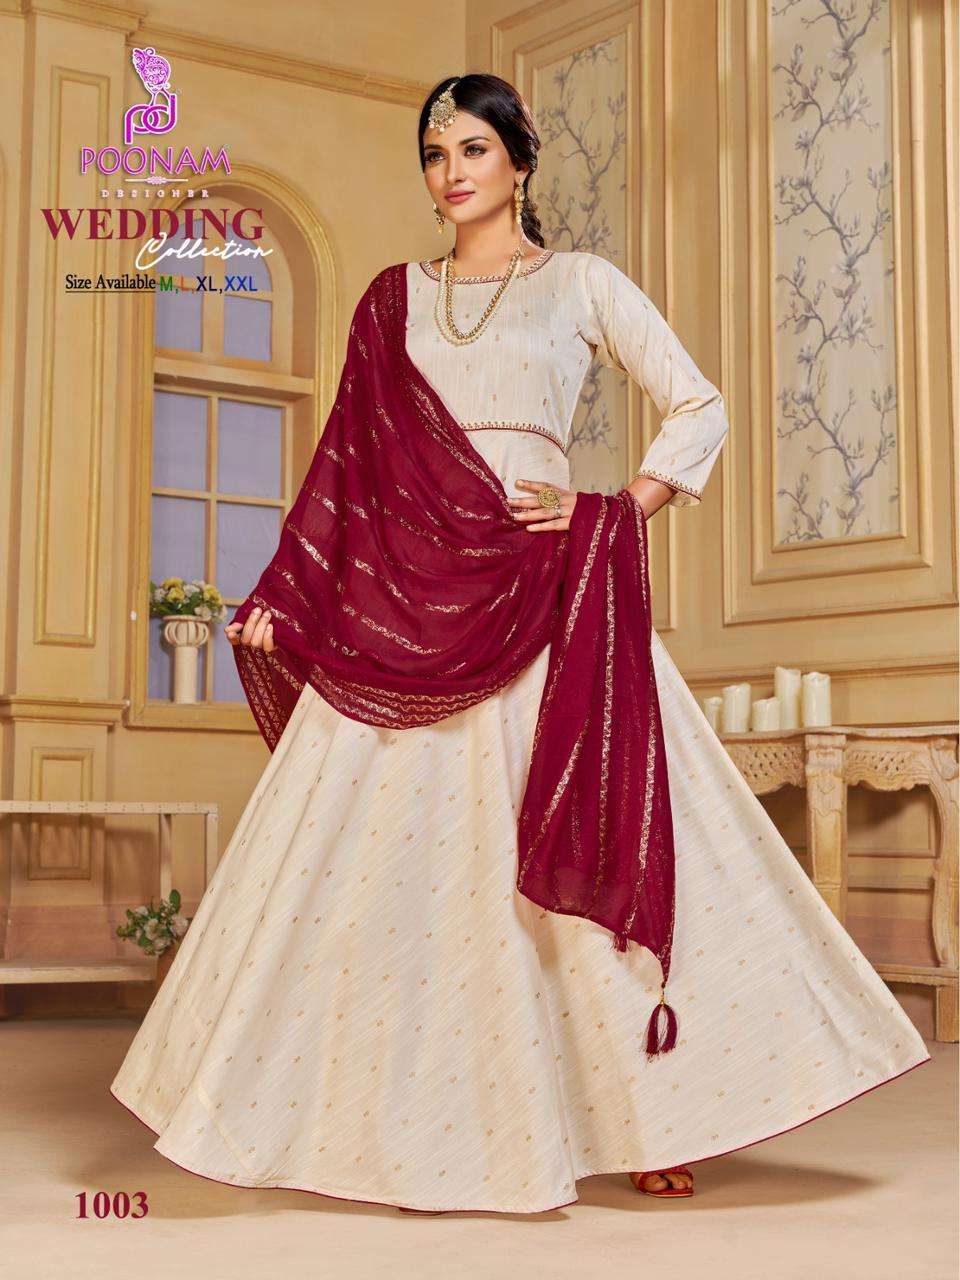 poonam designer wedding collection 1001-1006 series wedding seasons special designer gown with dupatta new catalogue 